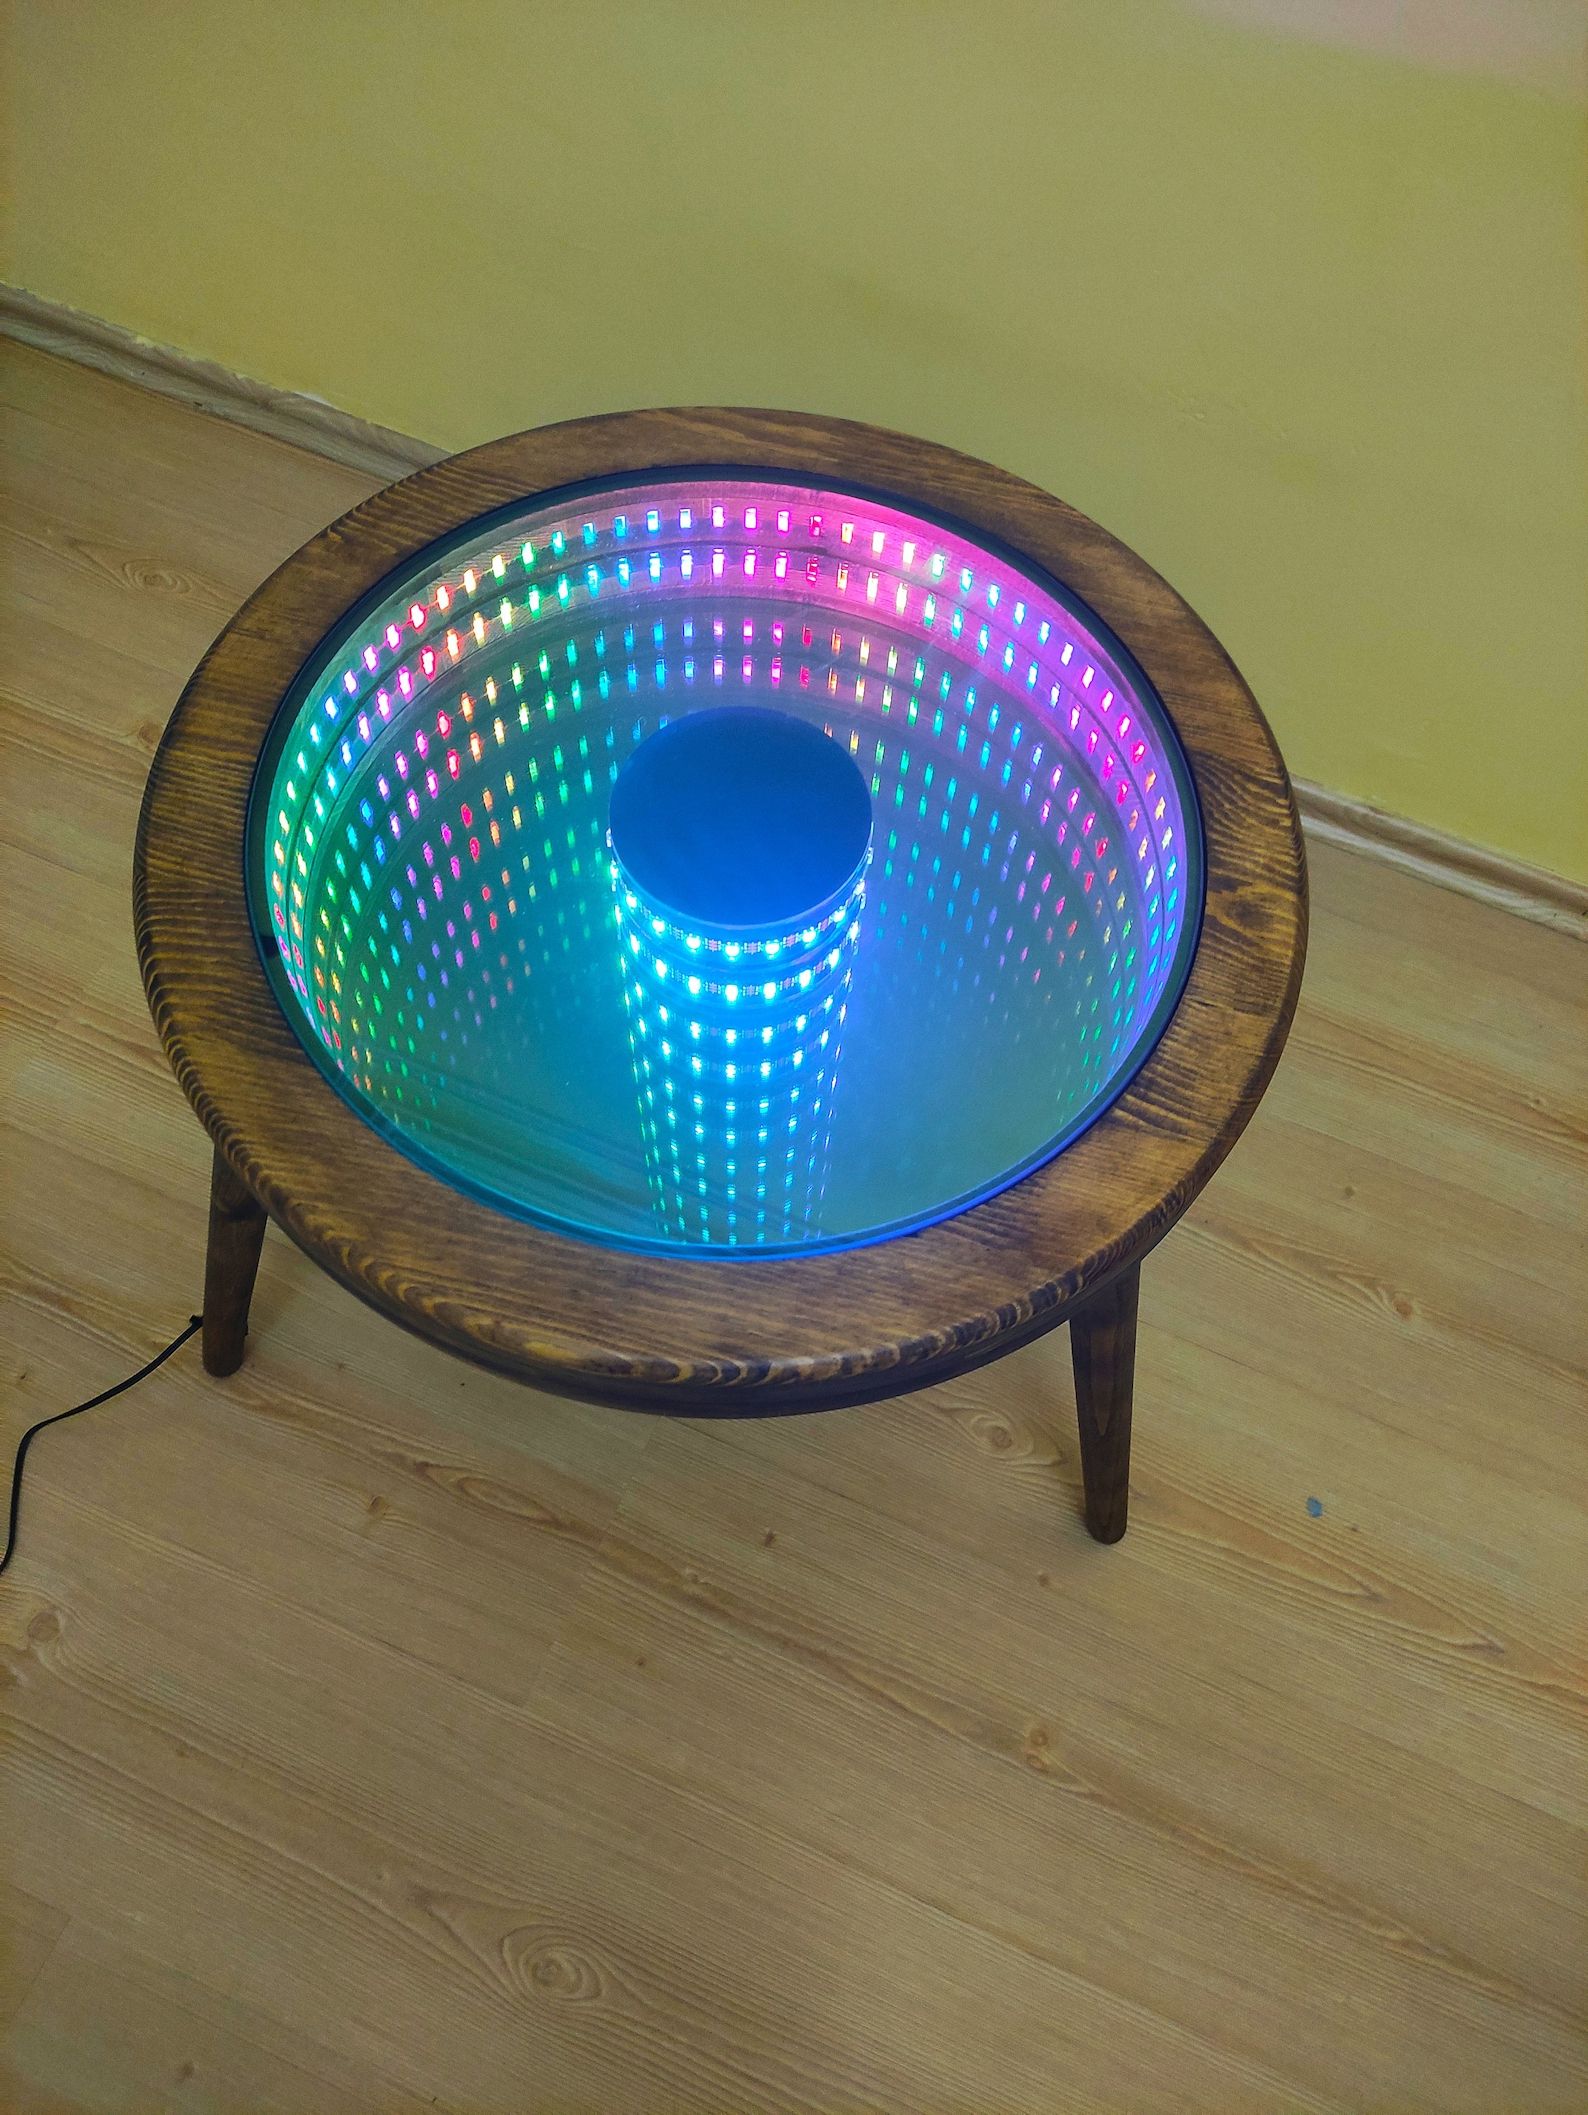 İnfinity Mirror Coffee Table Led Light Table Wooden Coffee | Etsy Within Coffee Tables With Led Lights (Gallery 17 of 20)